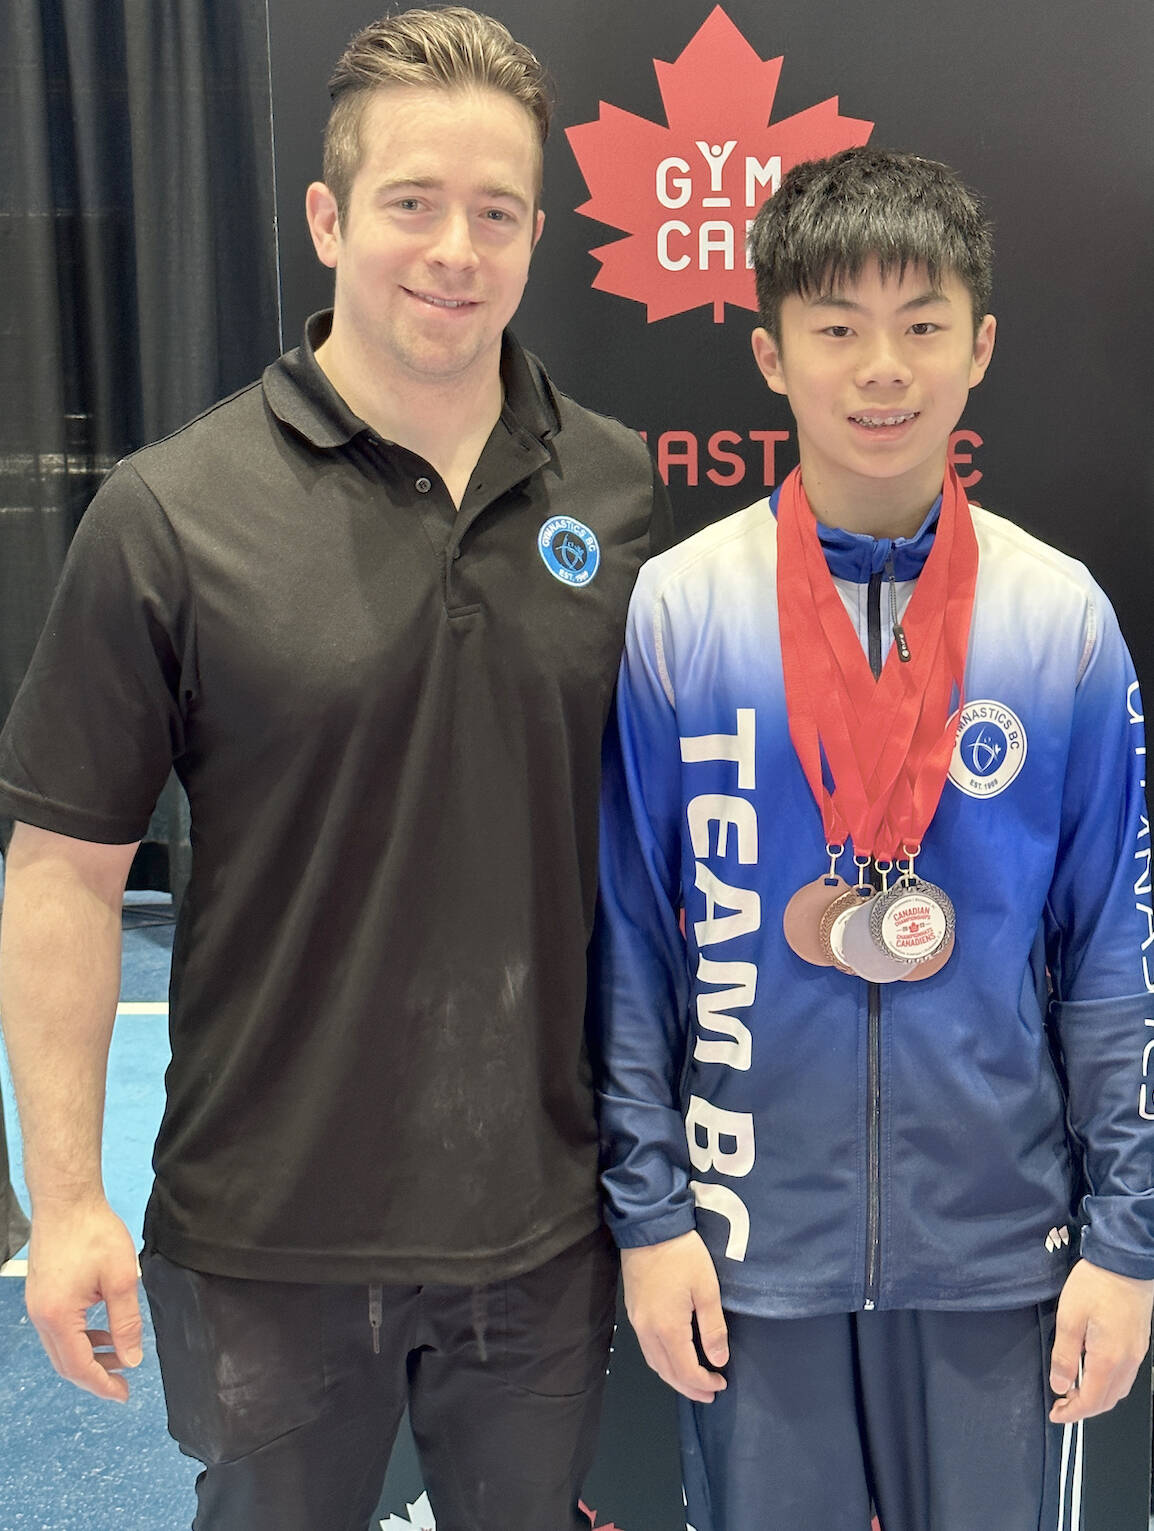 Langley Gymnastics Foundation coach Mark Rowbotham (L) and gymnast Ethan Lee at the 2023 Canadian National Championships held at Richmond Oval May 18-22. (LGF/Special to Langley Advance Times)